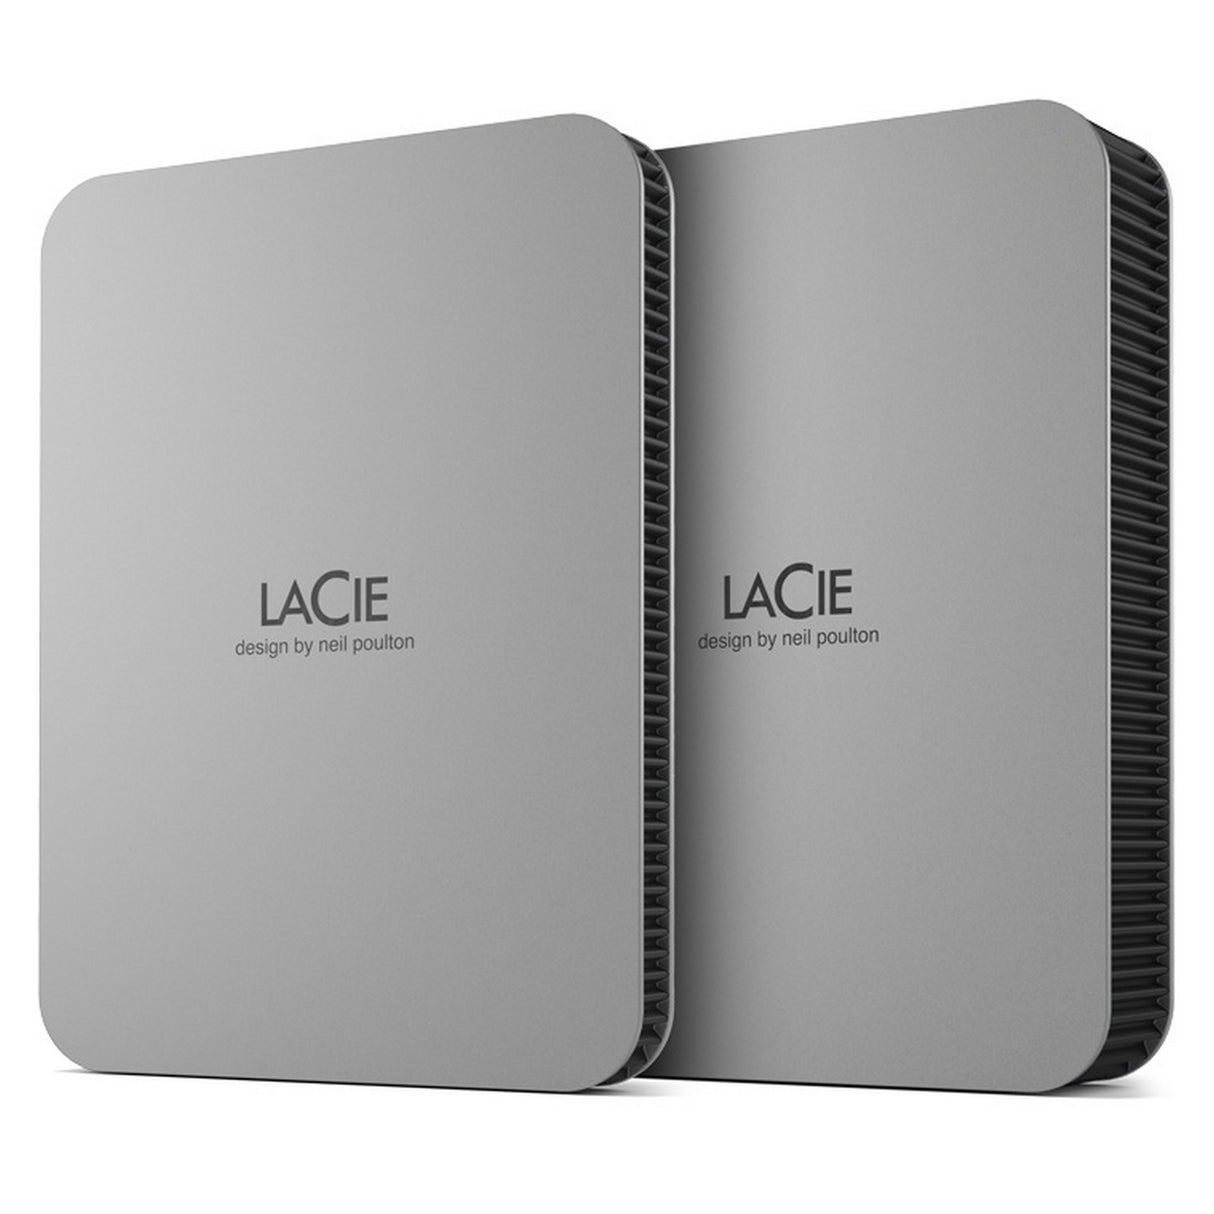 LaCie STLR2000400 Mobile Drive Secure External HDD, 2TB